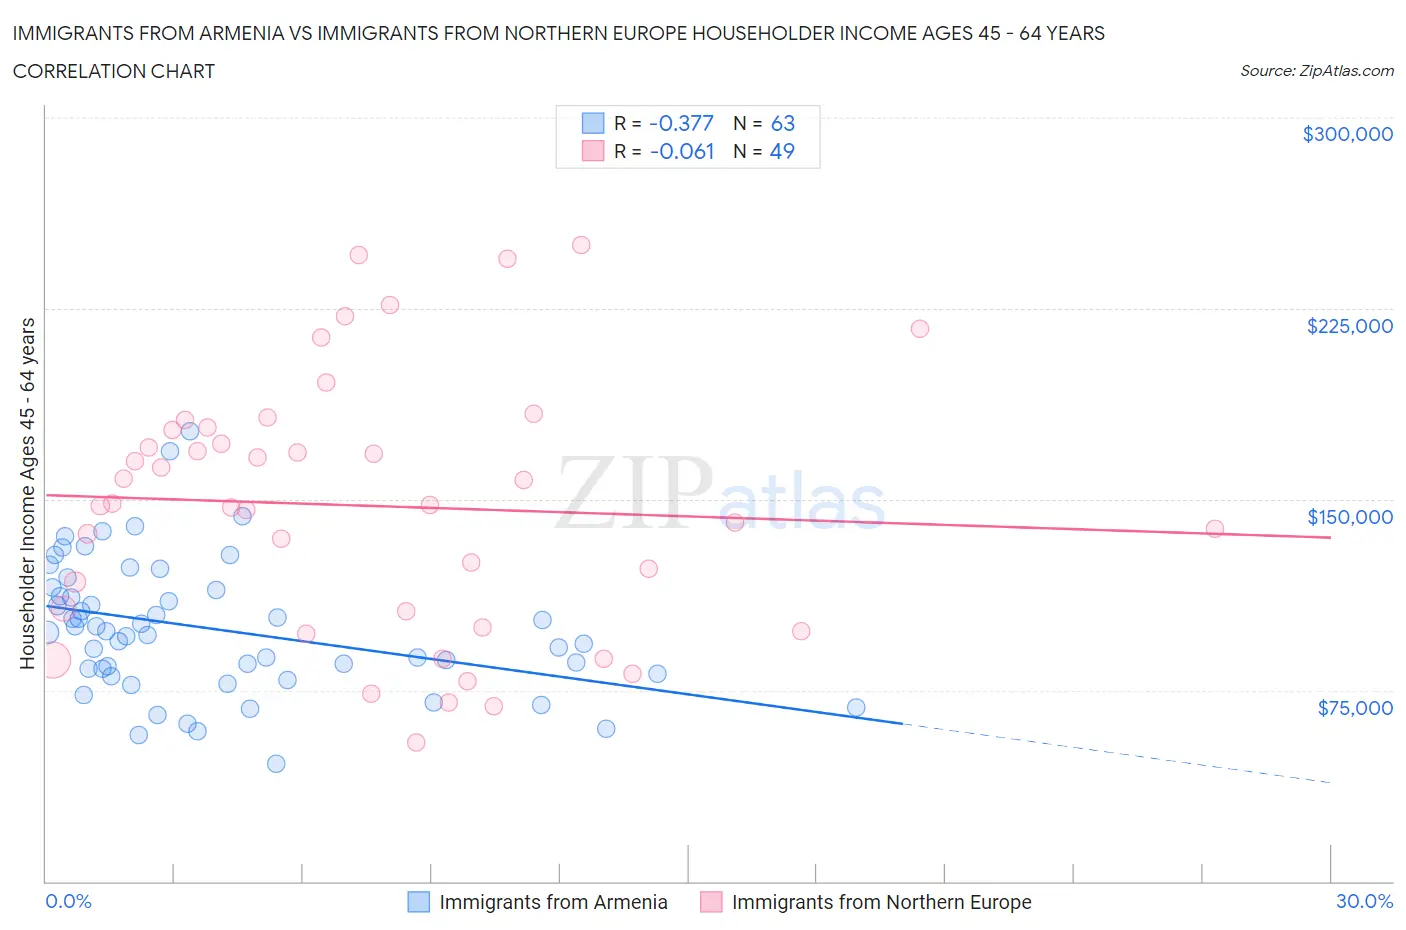 Immigrants from Armenia vs Immigrants from Northern Europe Householder Income Ages 45 - 64 years